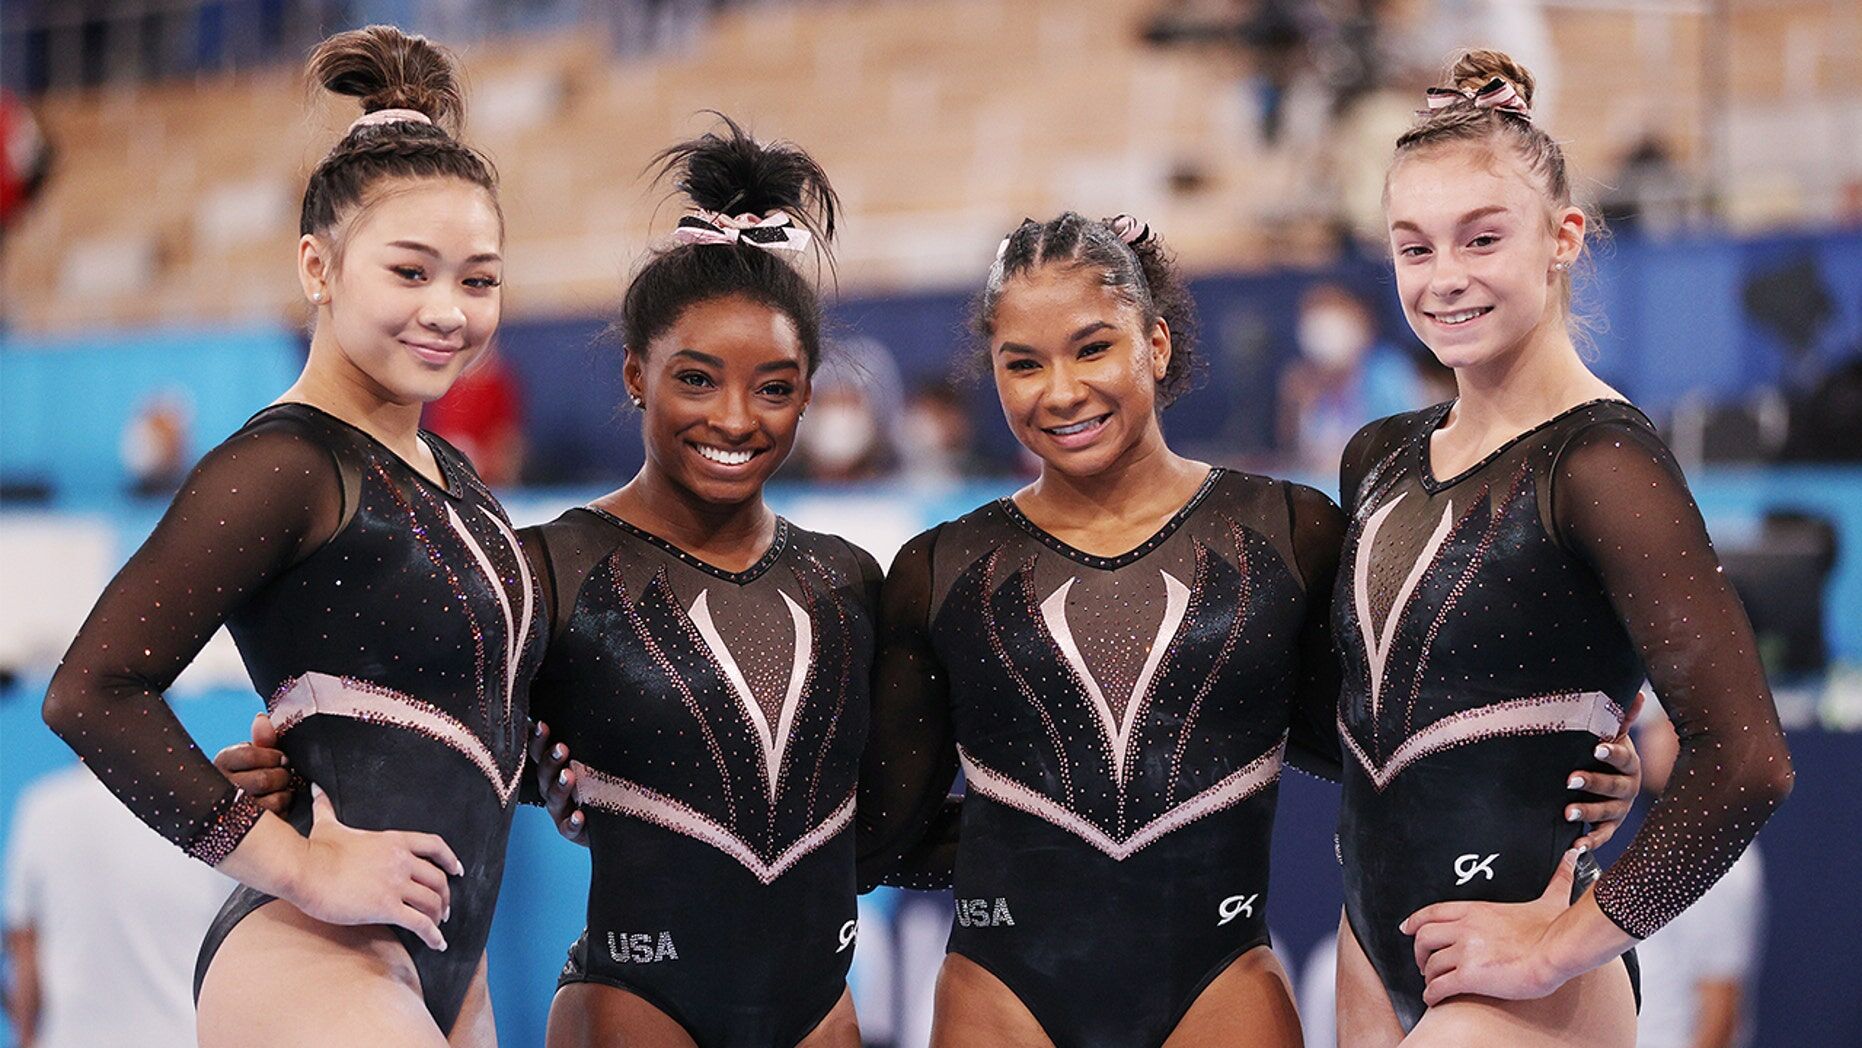 Olympic gymnasts sound off on the evolving leotard Power and prestige goes with those leos National wdrb